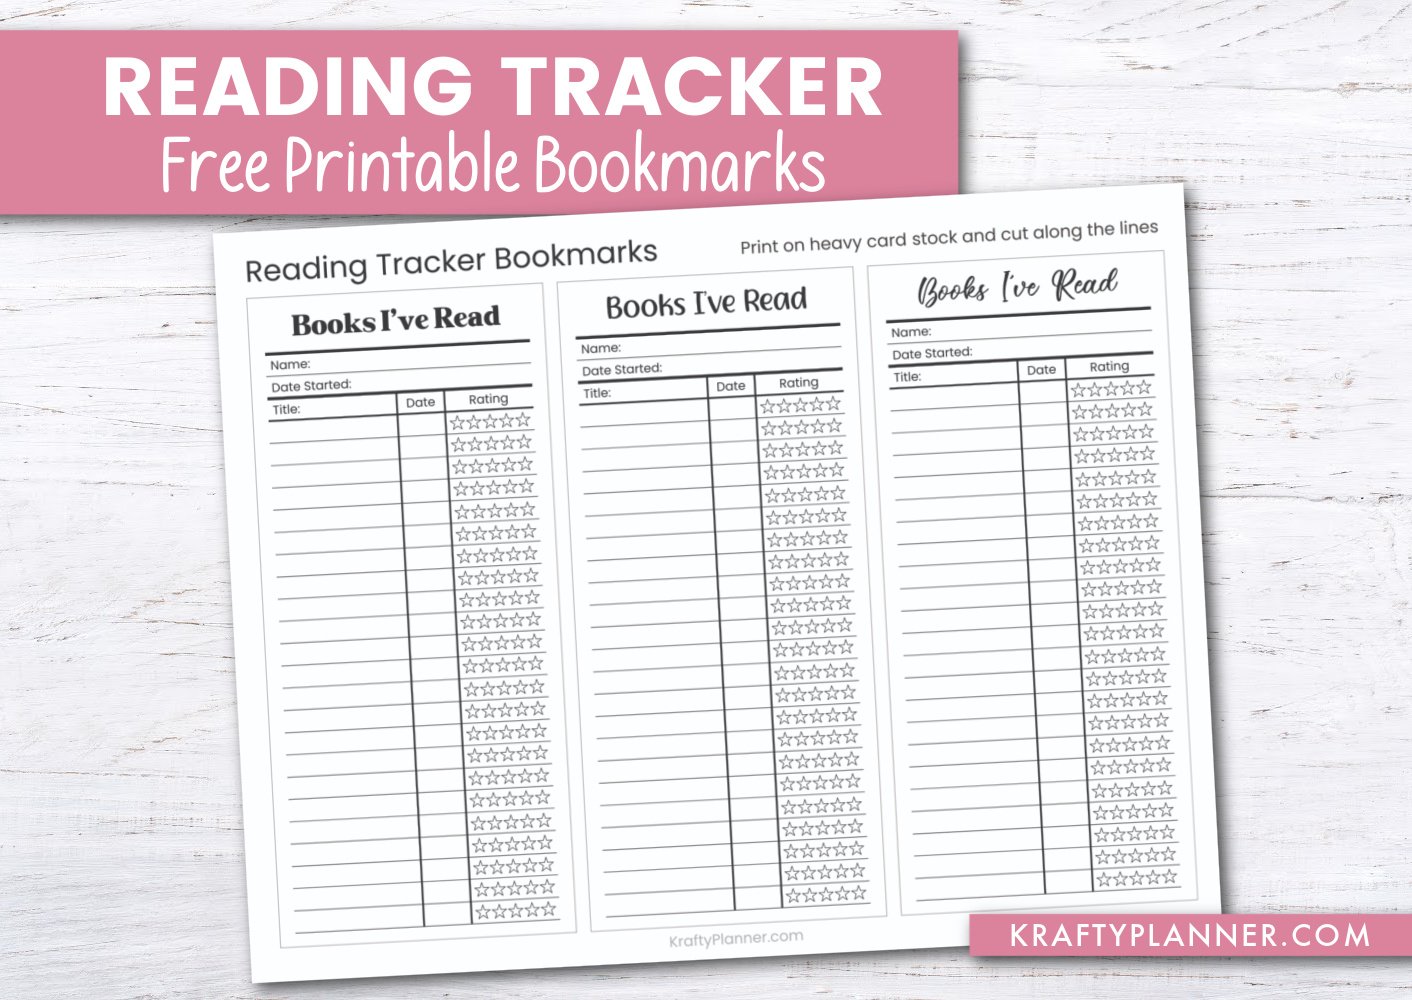 Free Printable Book Tracker Bookmarks to Chart Your Reading Journey!